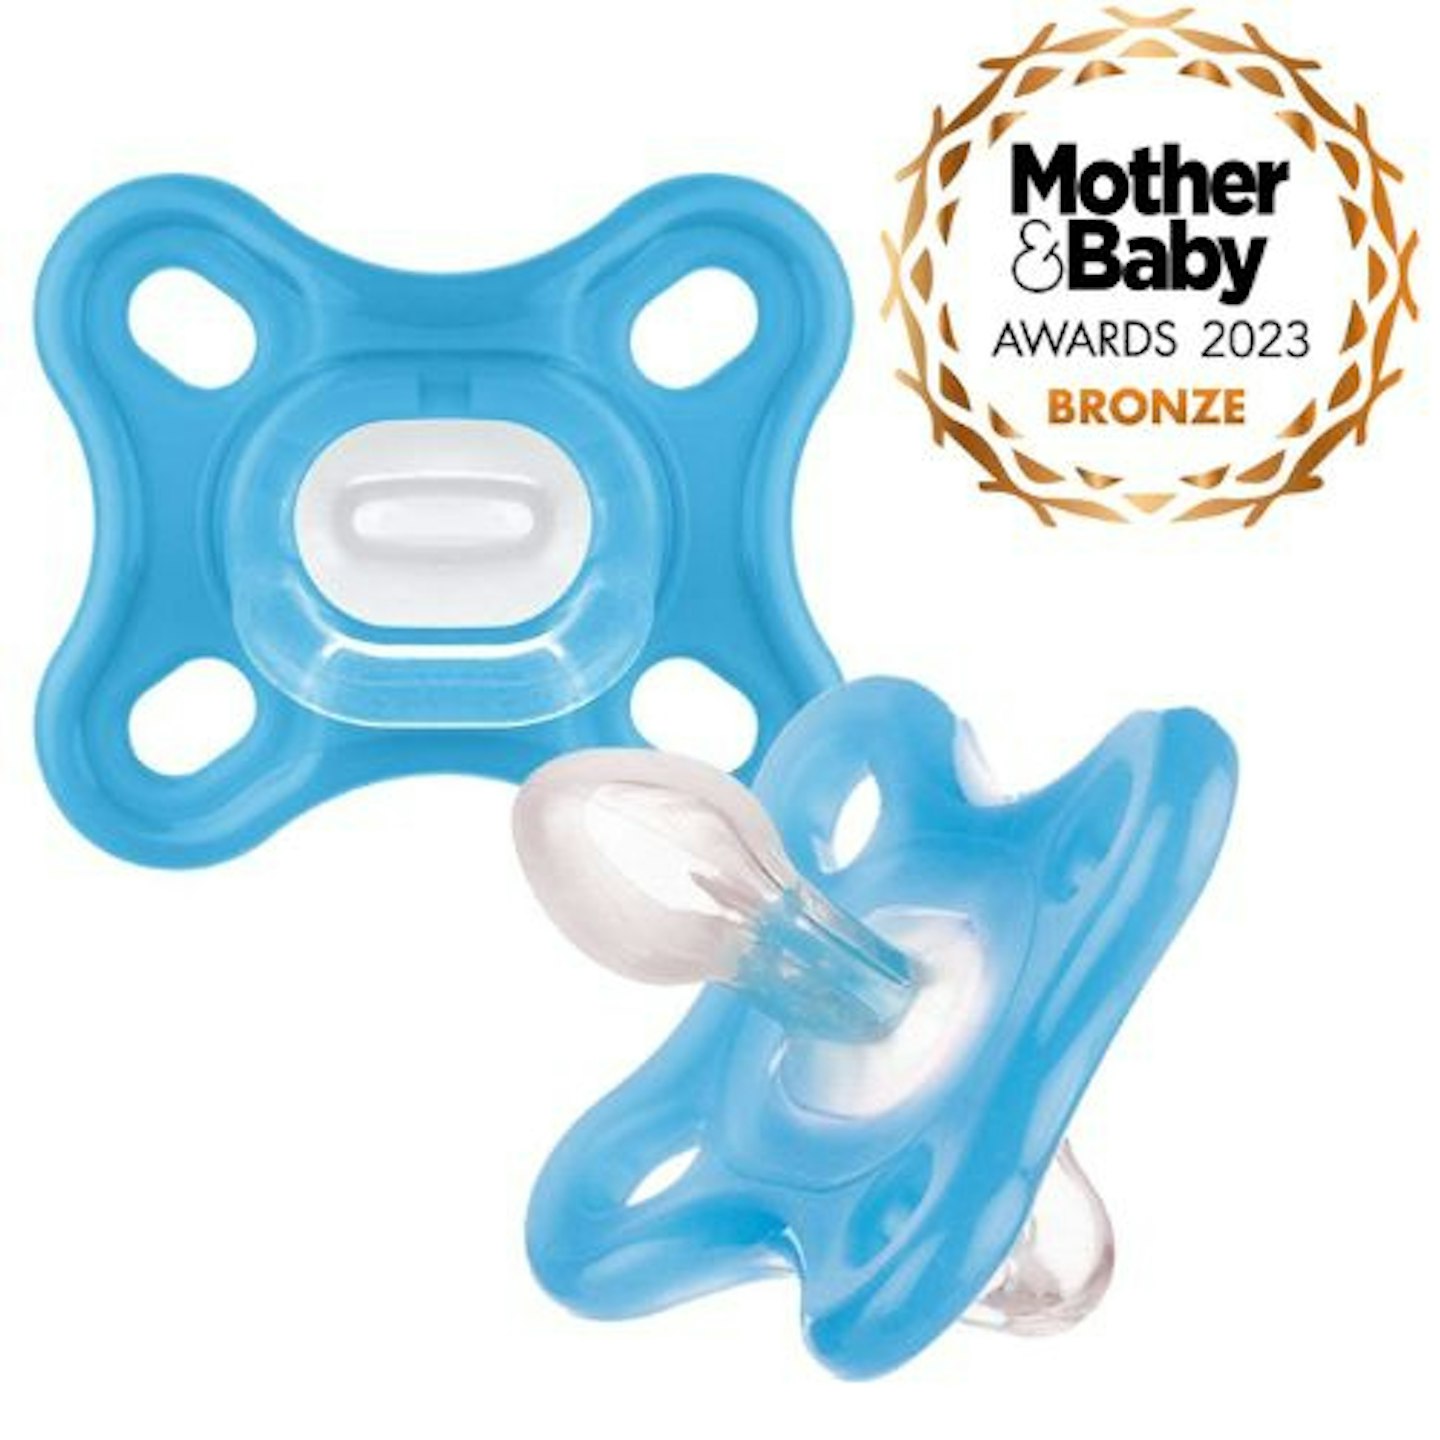 https://images.bauerhosting.com/affiliates/sites/12/2022/11/MAM-Comfort-All-Silicone-Soothers.jpg?auto=format&w=1440&q=80